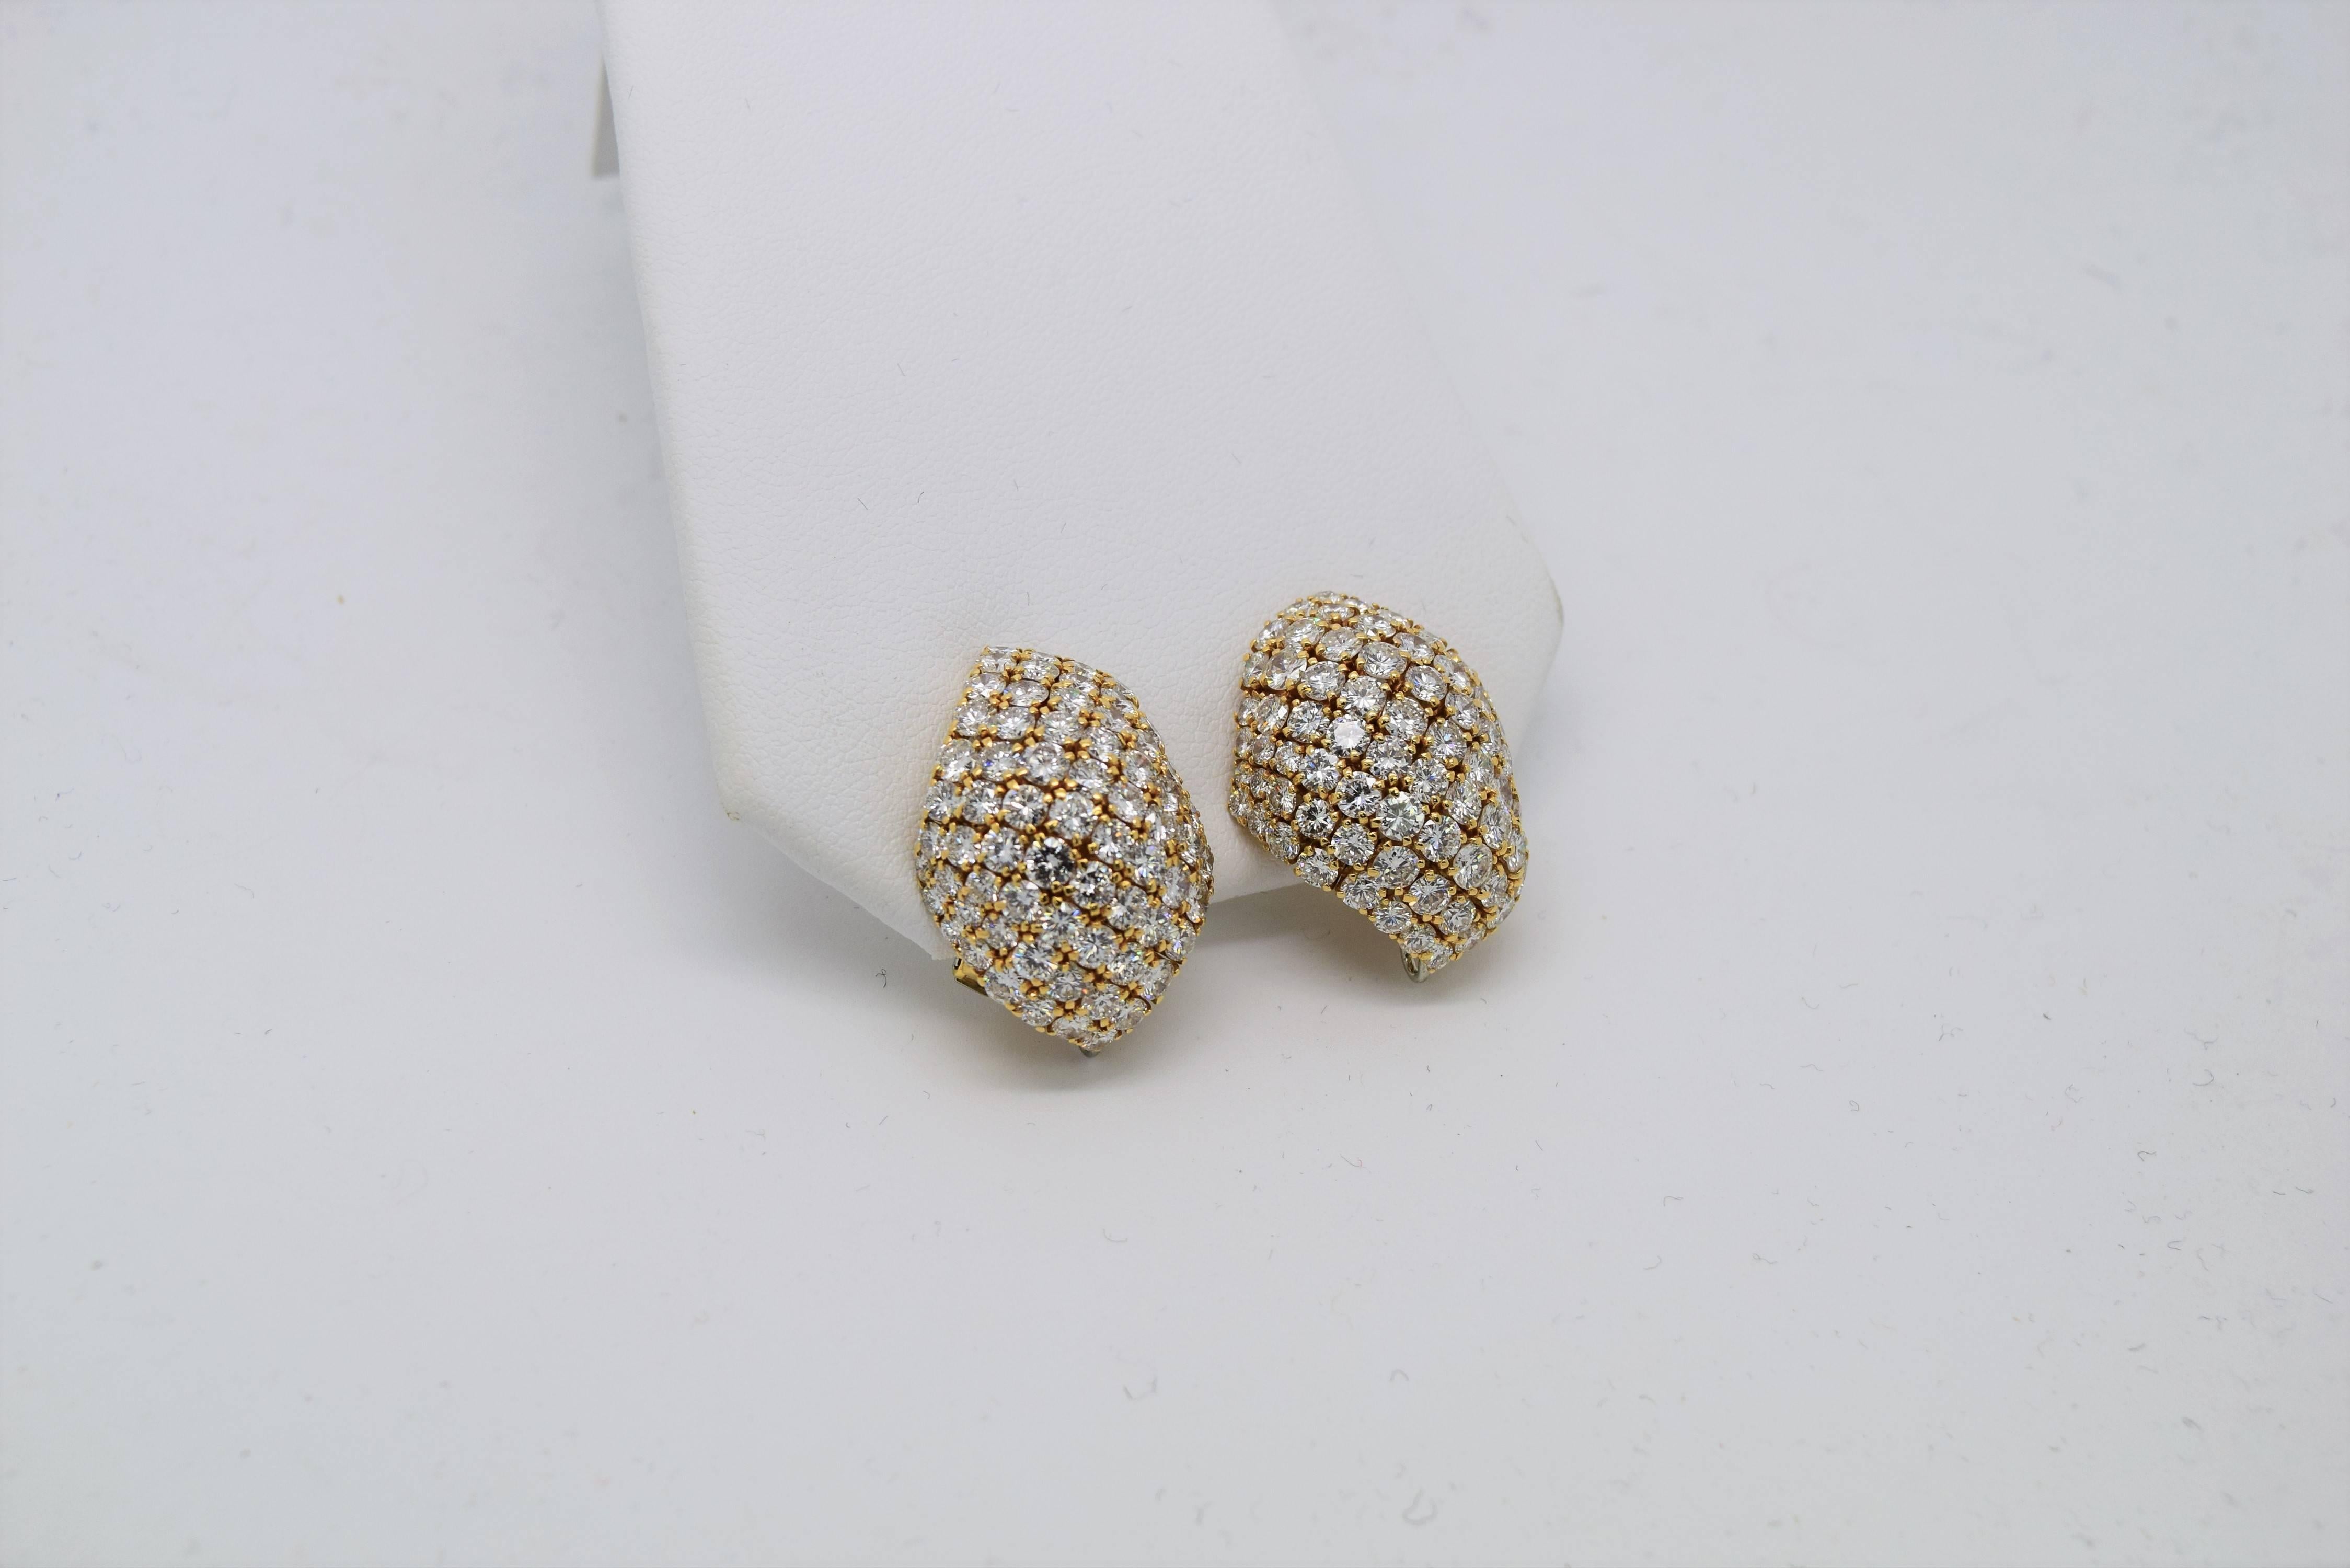 This beautiful pair of David Webb yellow gold diamond earrings has approximately 11.35cttw of 148 round diamonds and is set in 18k yellow gold.
The diamonds are collection quality (E-F in color and VS1+ in clarity)
Currently clip on's but posts can